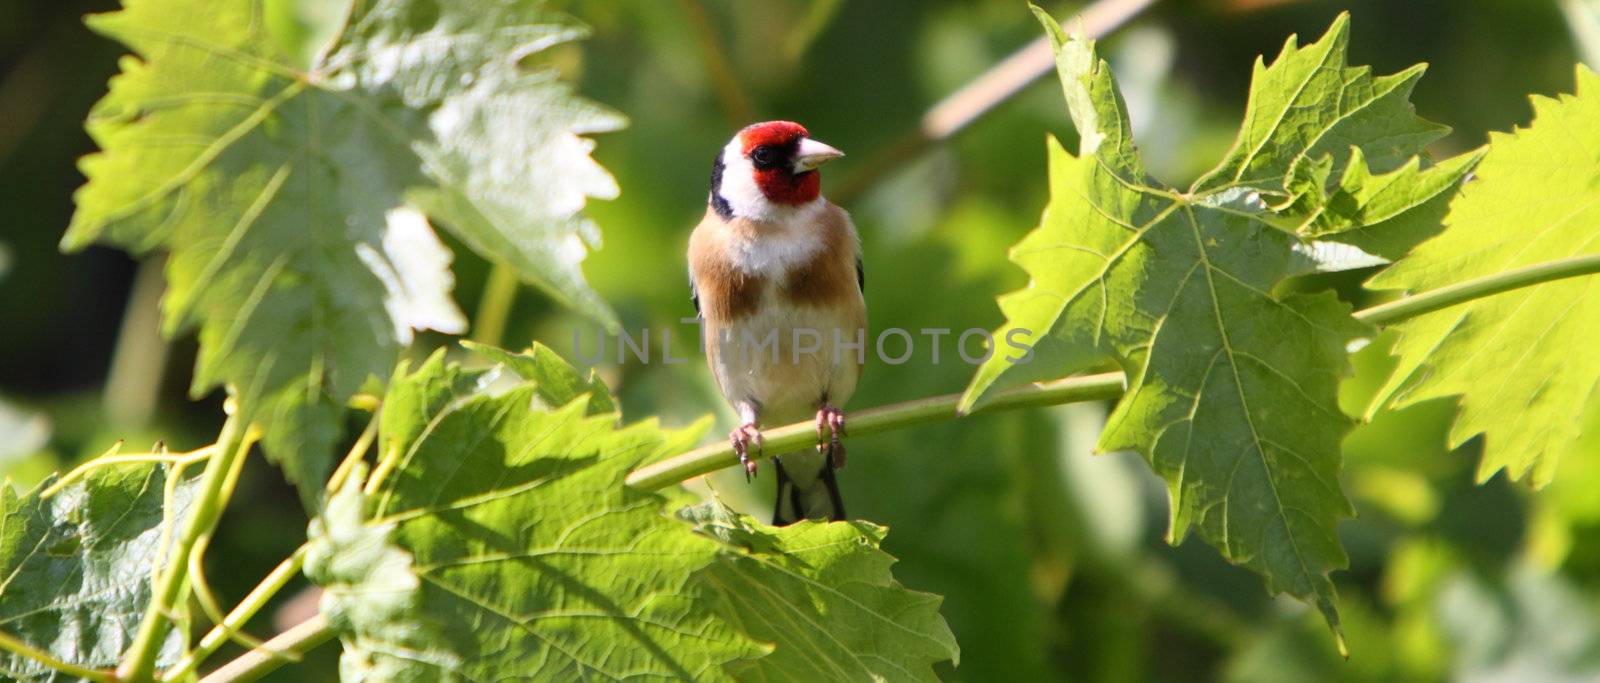 goldfinch, Carduelis carduelis by mitzy